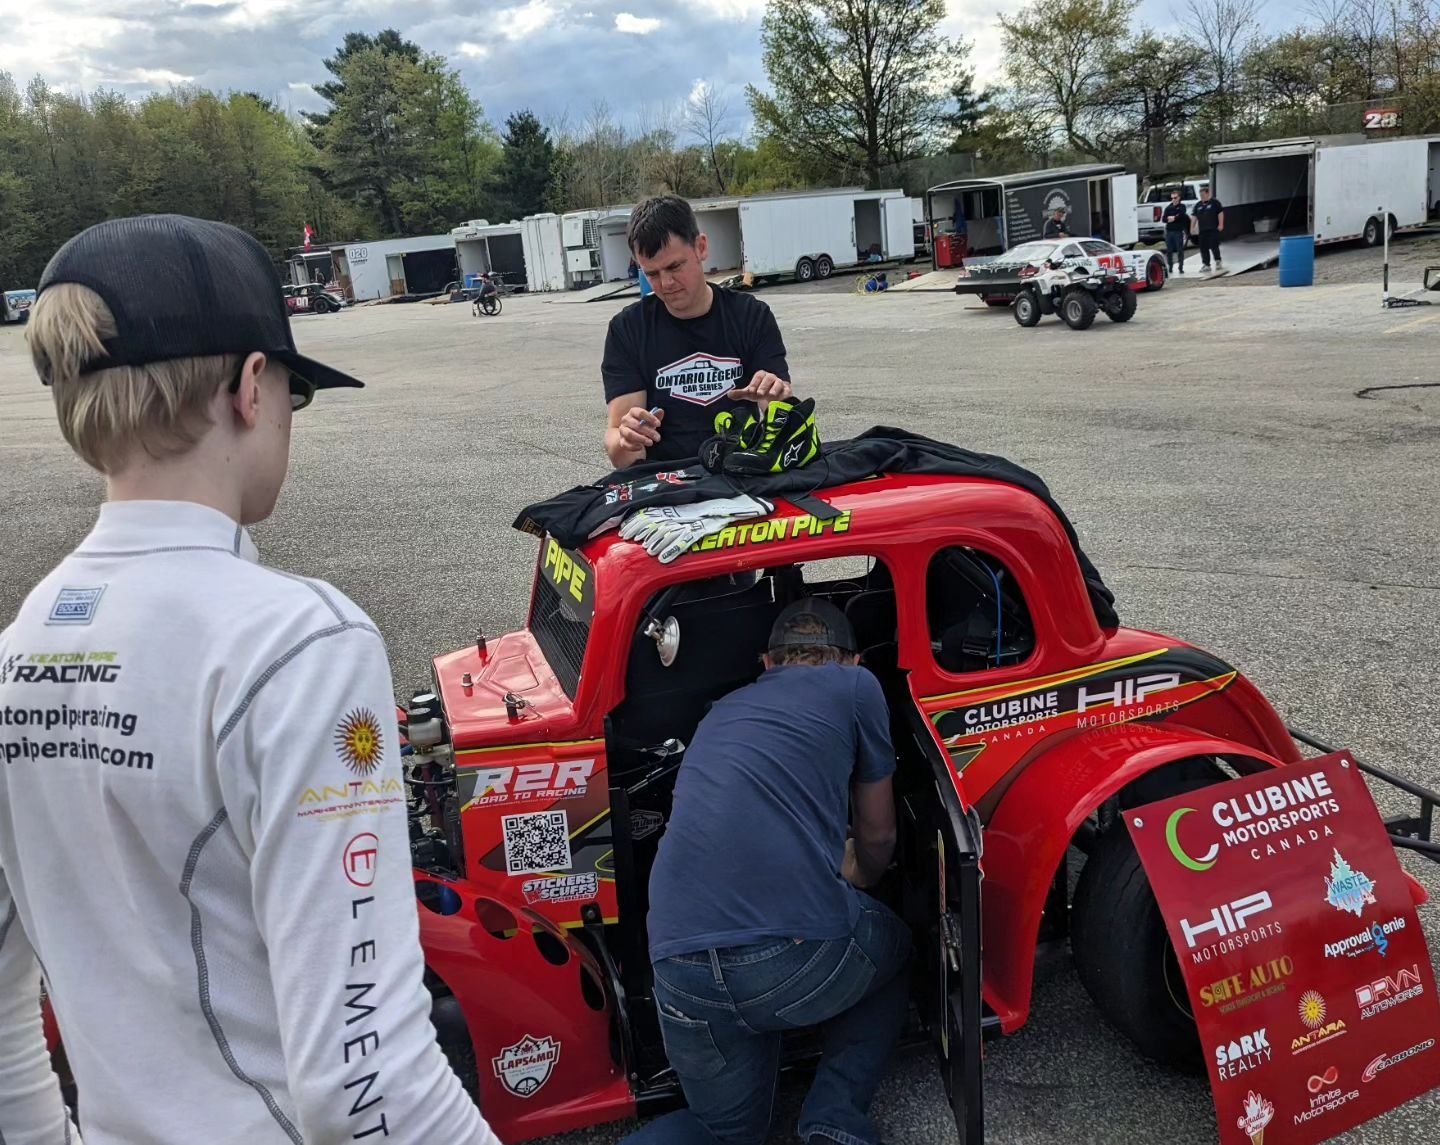 Laying everything out for Tech Inspection! @ontariolegendcarseries officials were out tonight thoroughly inspecting the cars and gear.

Everything A OK over here✅

#jdcmotorsports #canada  #techinspection #r2r #roadtoracing #keatonpiperacing #racing 